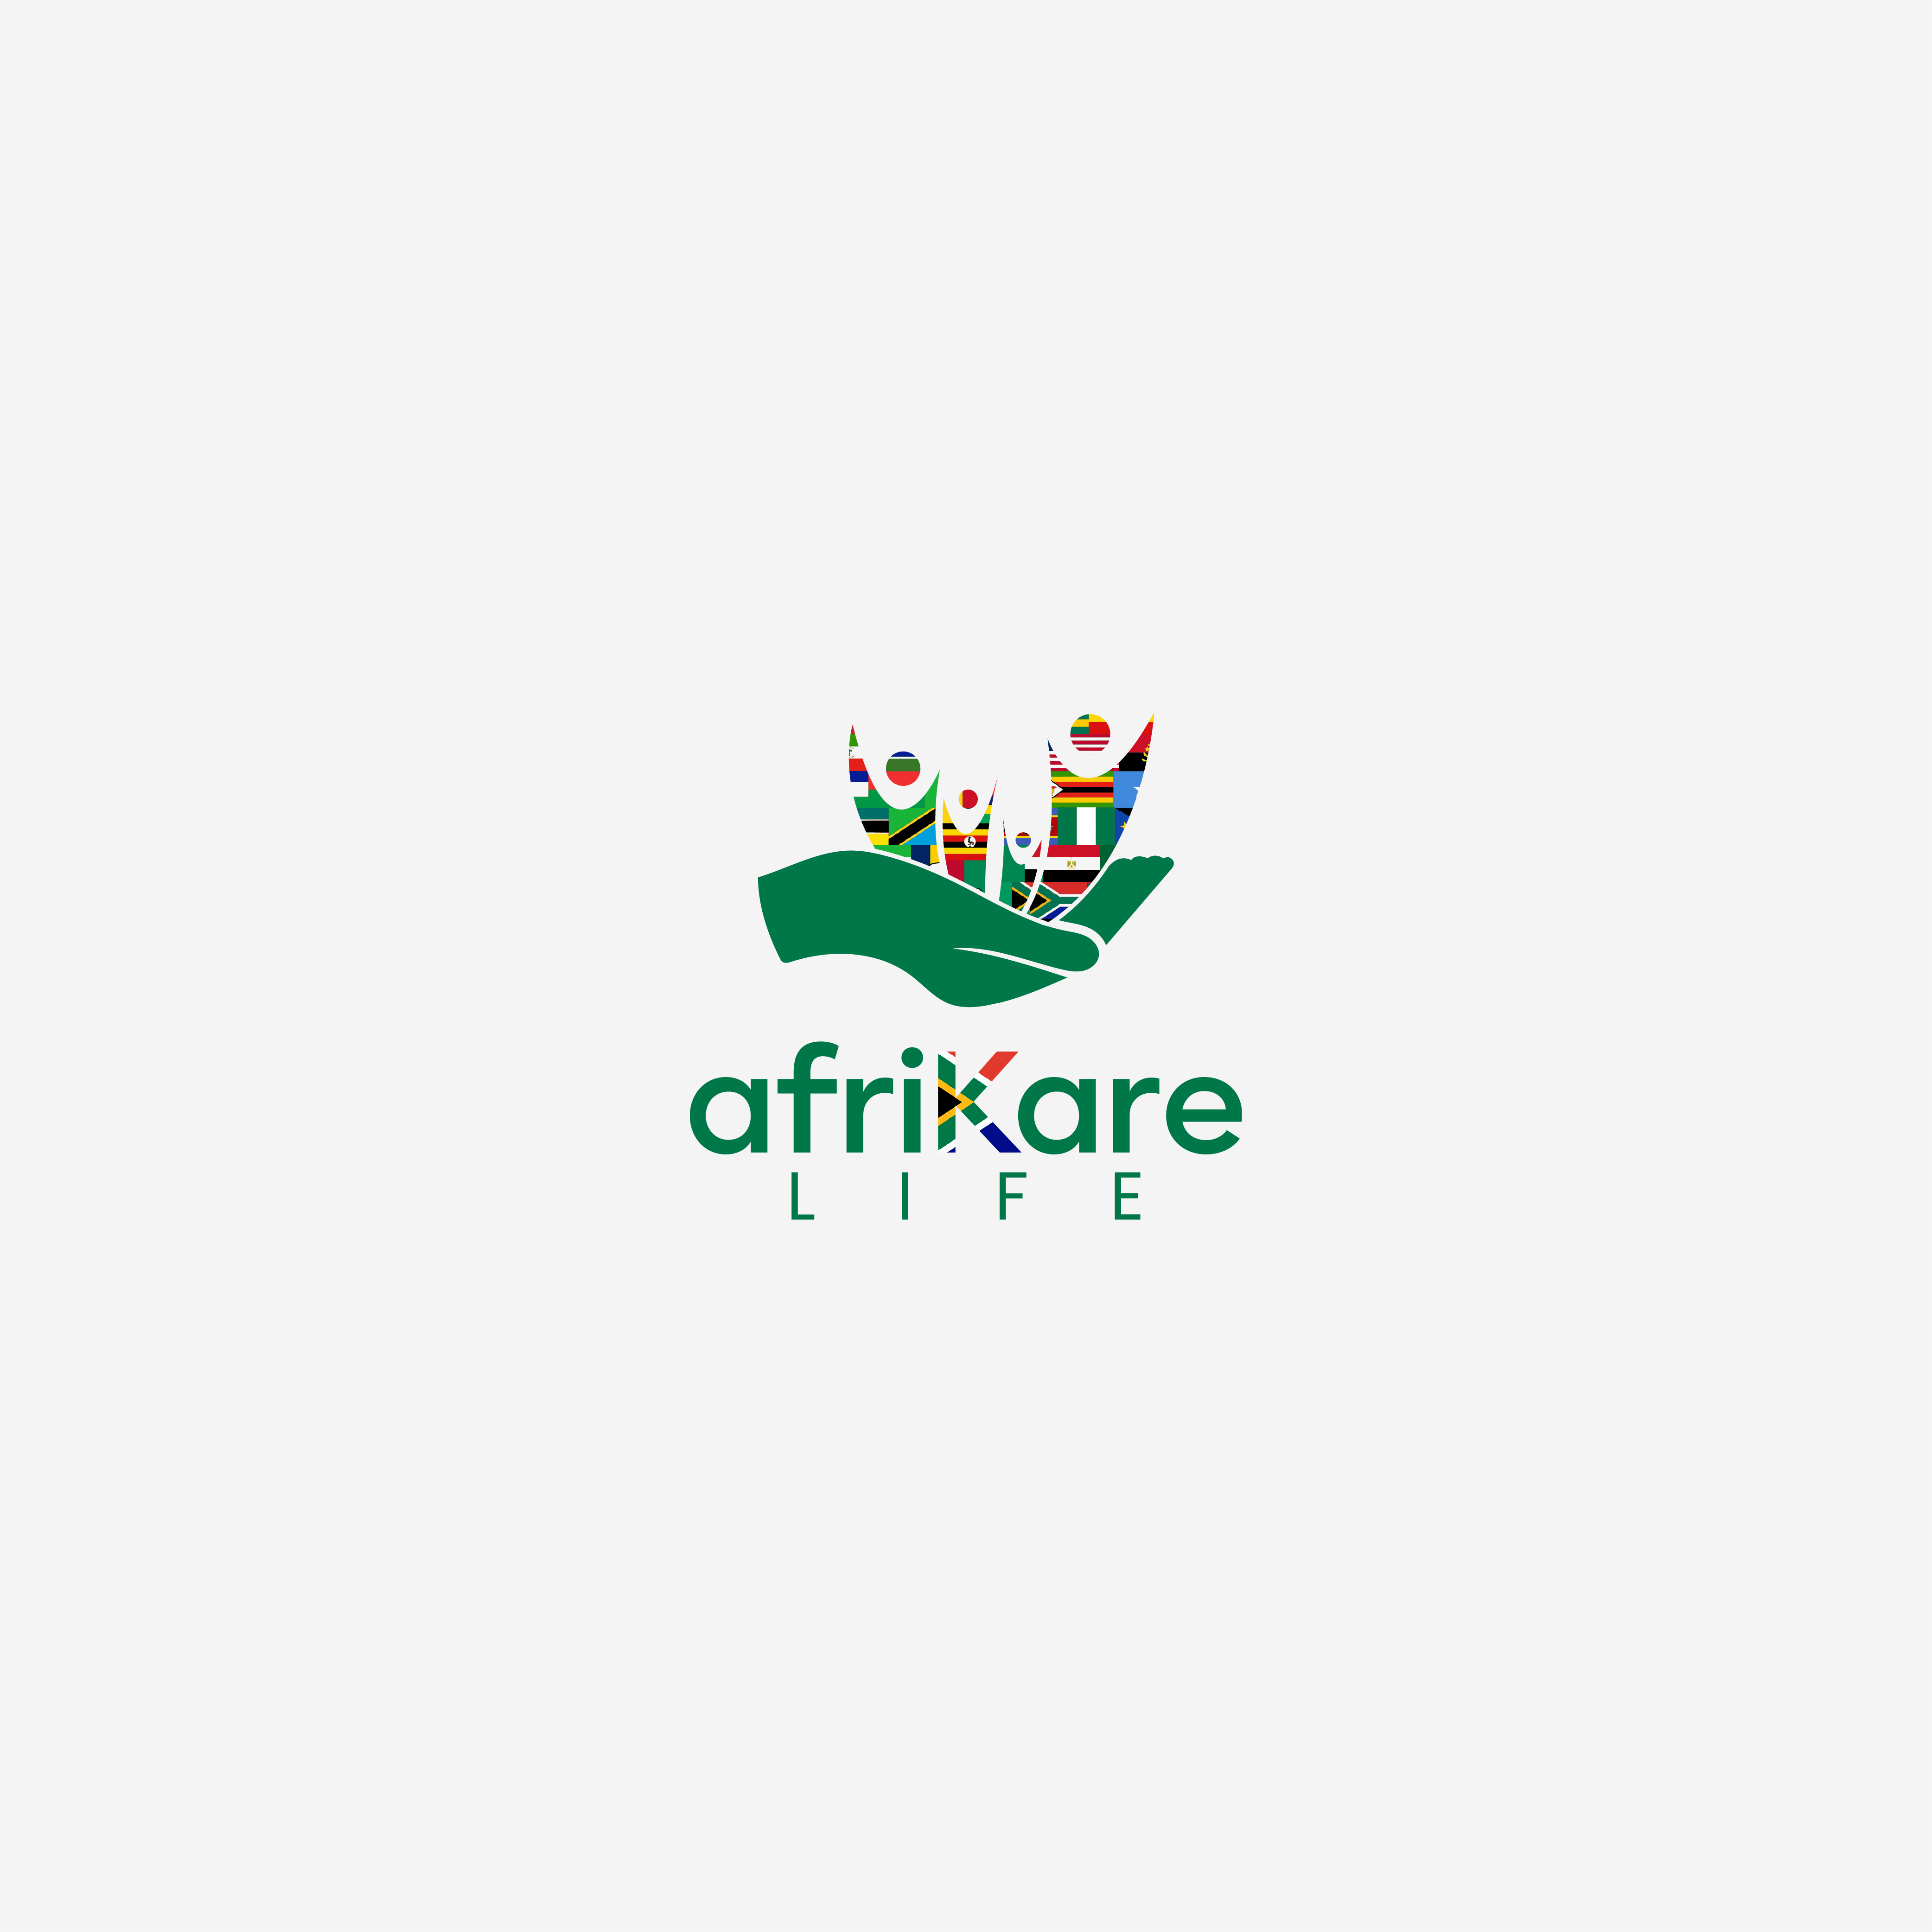 AfriKare Life Becomes The First financial Service company For Africans In the United States